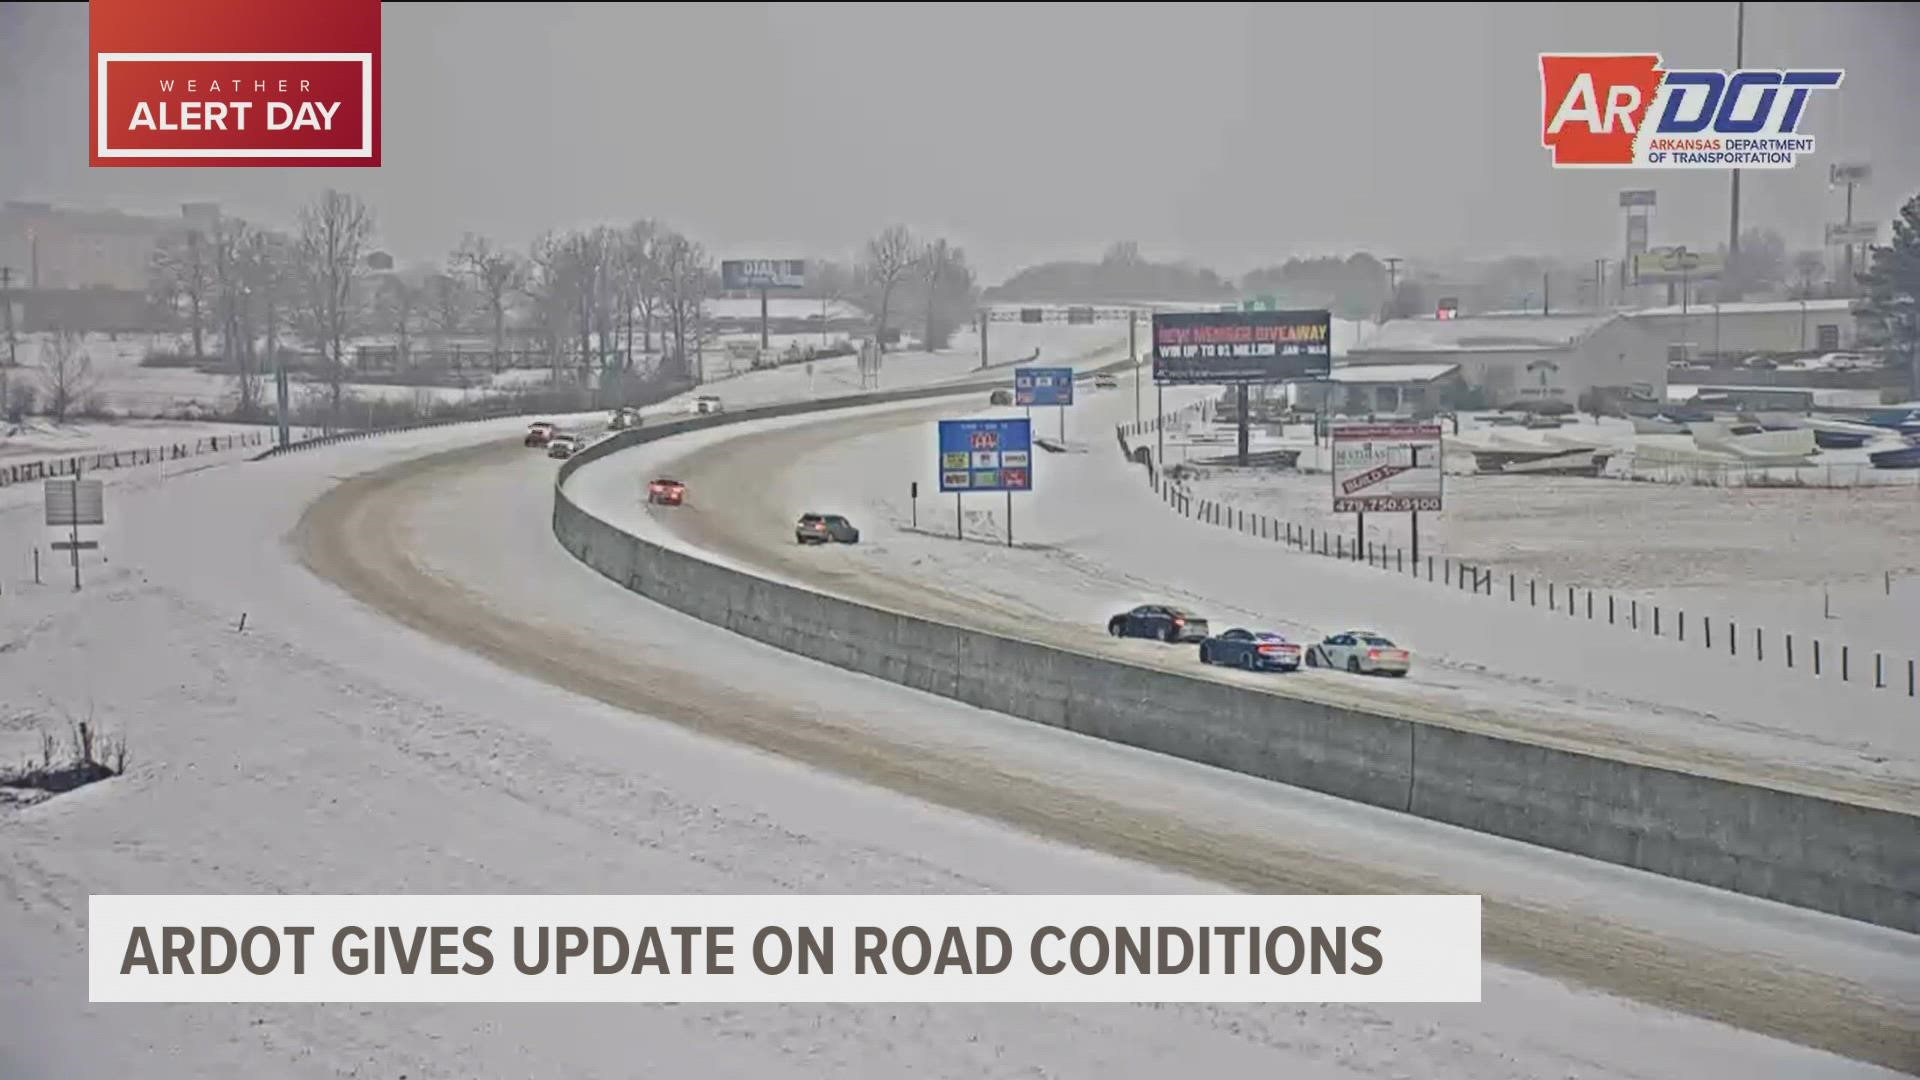 The Arkansas Department of Transportation is giving continuous updates on road conditions in NWA and the River Valley.